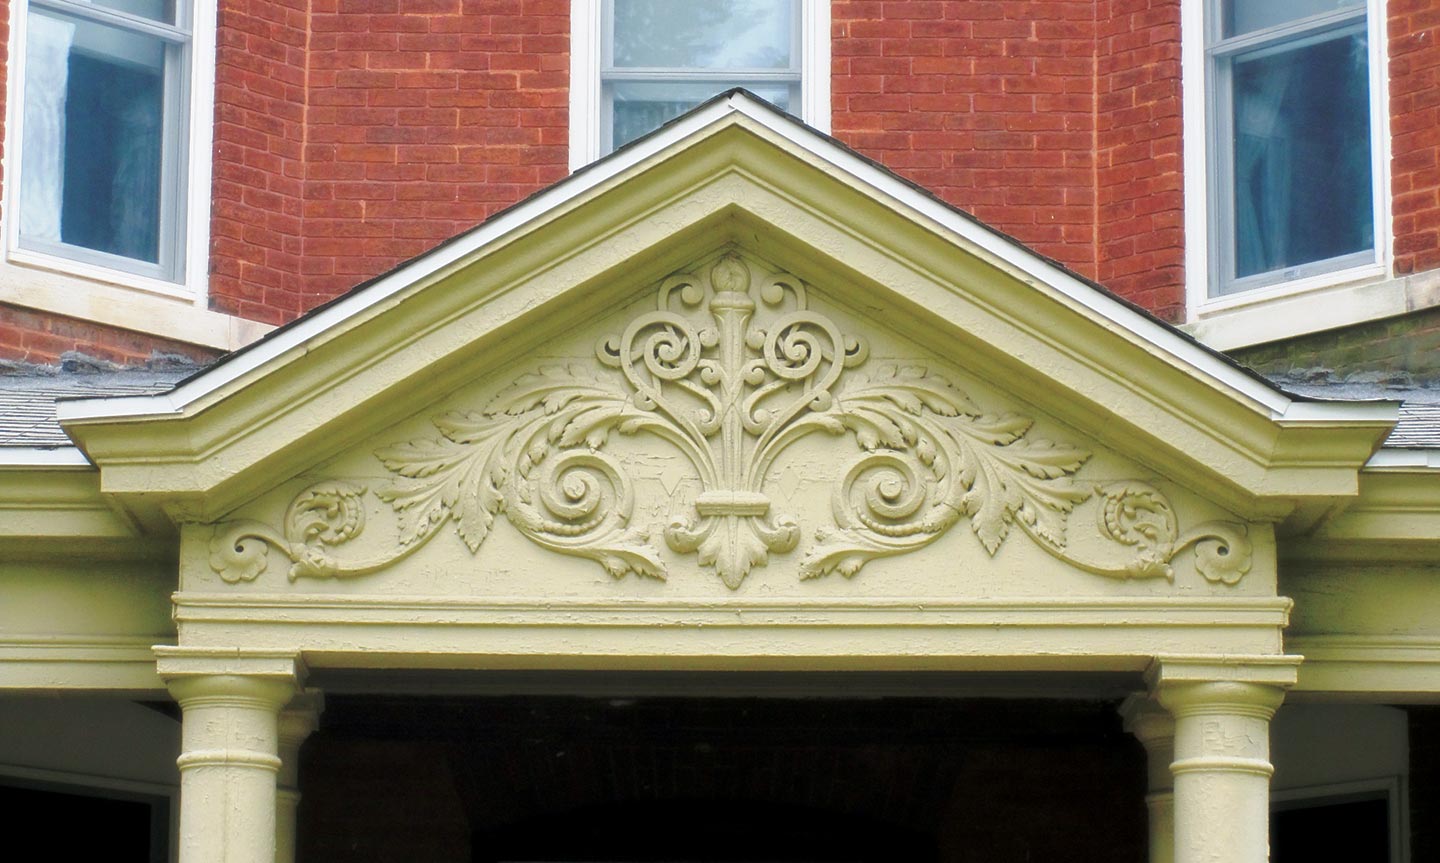 Detail view of the ornate woodwork above the entryway